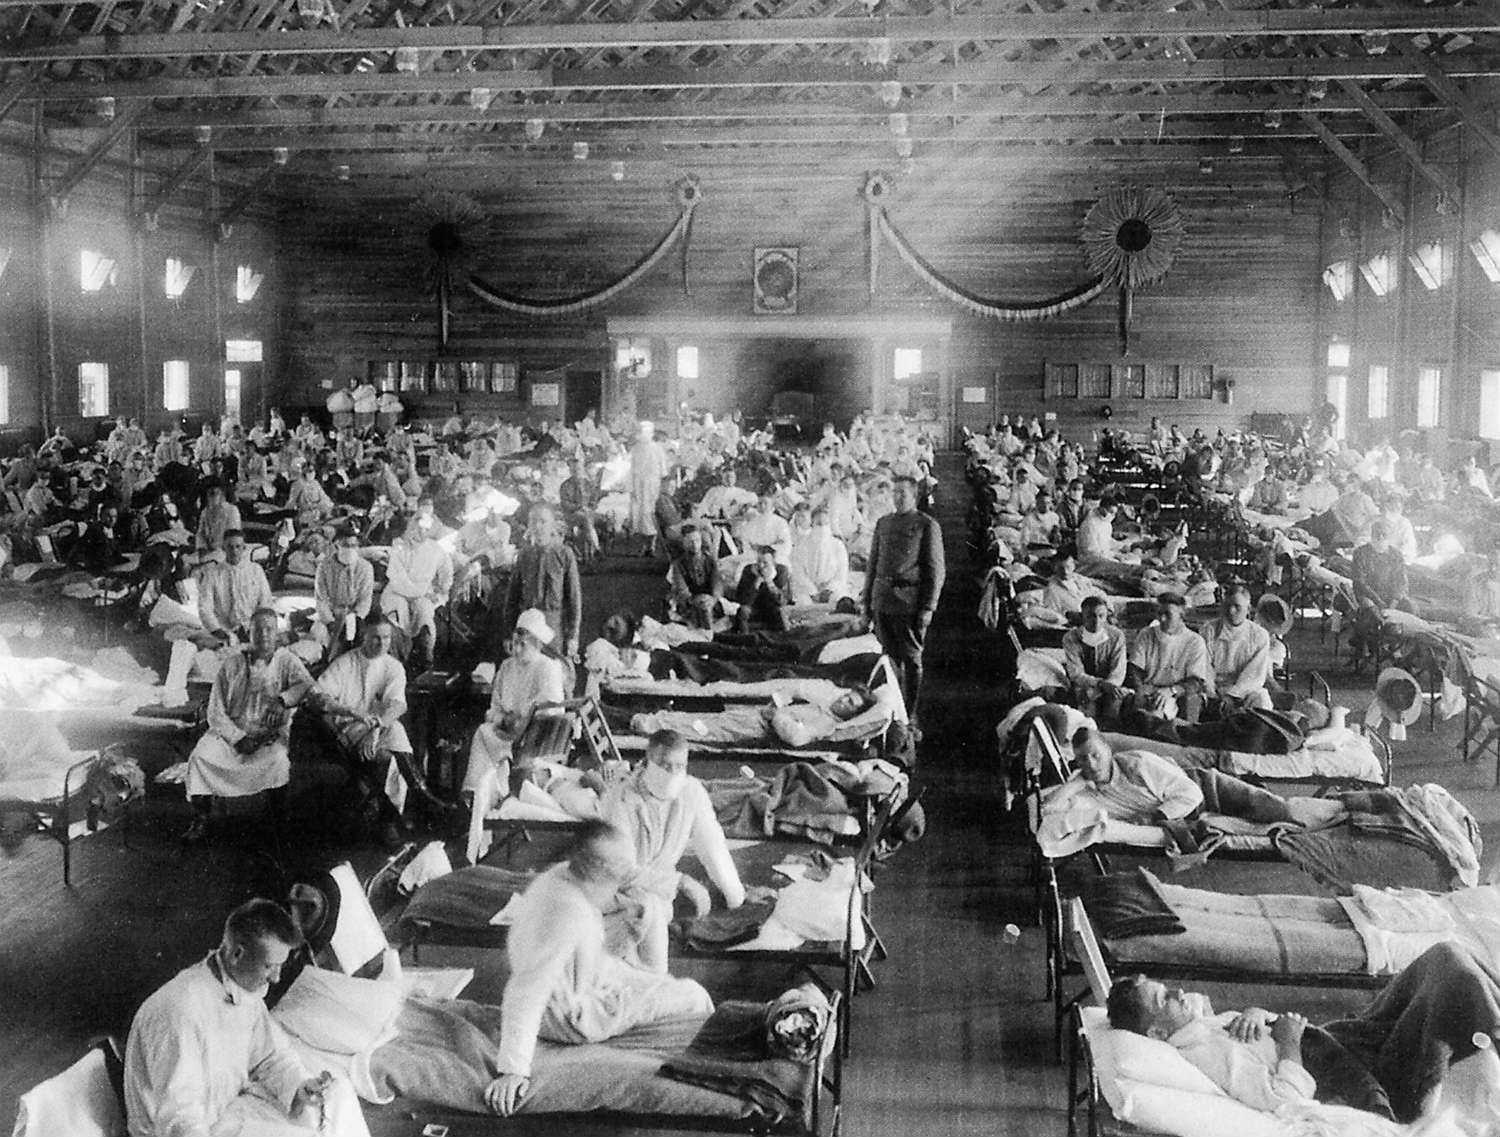 The deadly 1918 flu pandemic